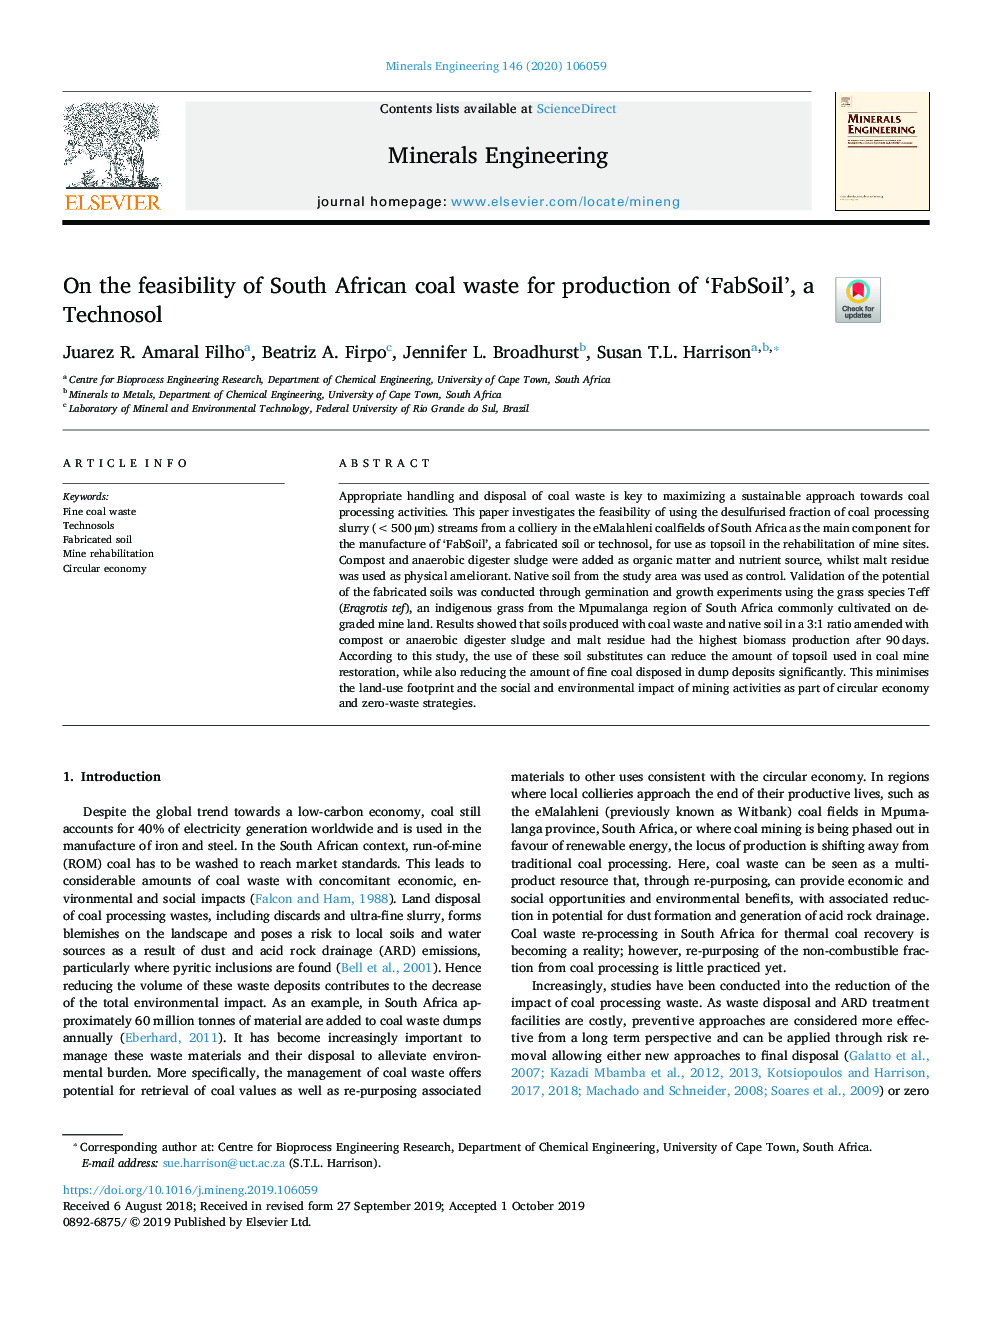 On the feasibility of South African coal waste for production of 'FabSoil', a Technosol